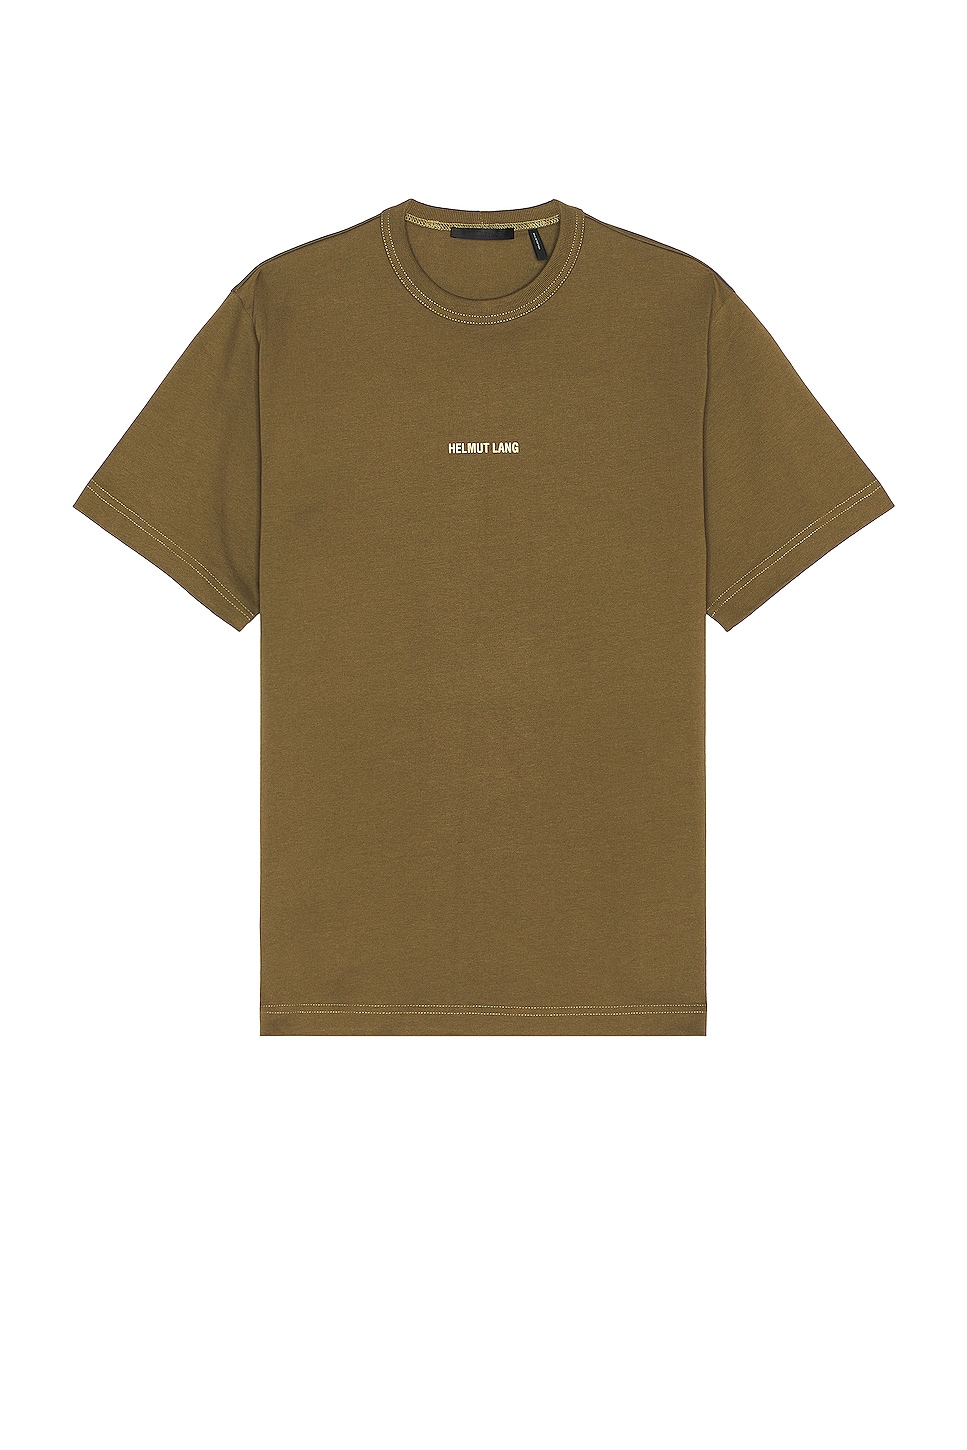 Image 1 of Helmut Lang Outer Space 9 Tee in Olive